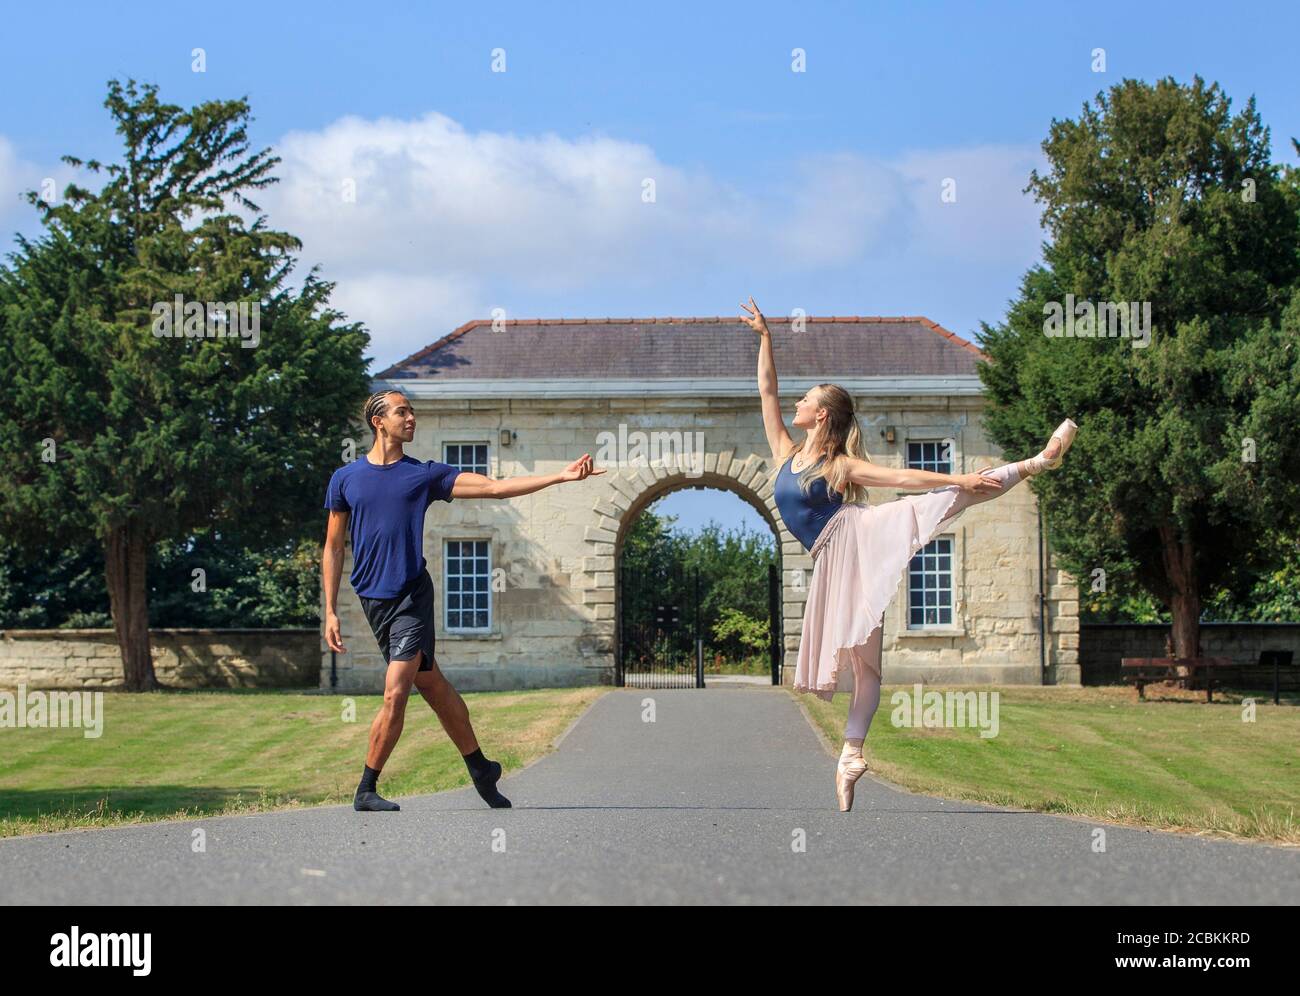 Artists of The Royal Ballet Joseph Aumeer (left) and Charlotte Tomkinson (right) in the grounds of Cusworth Hall in Doncaster, Yorkshire, as The Royal Ballet and Doncaster Council prepare ahead of Doncaster Dancing, a community engagement programme Inspired by the ballet Romeo and Juliet. Stock Photo